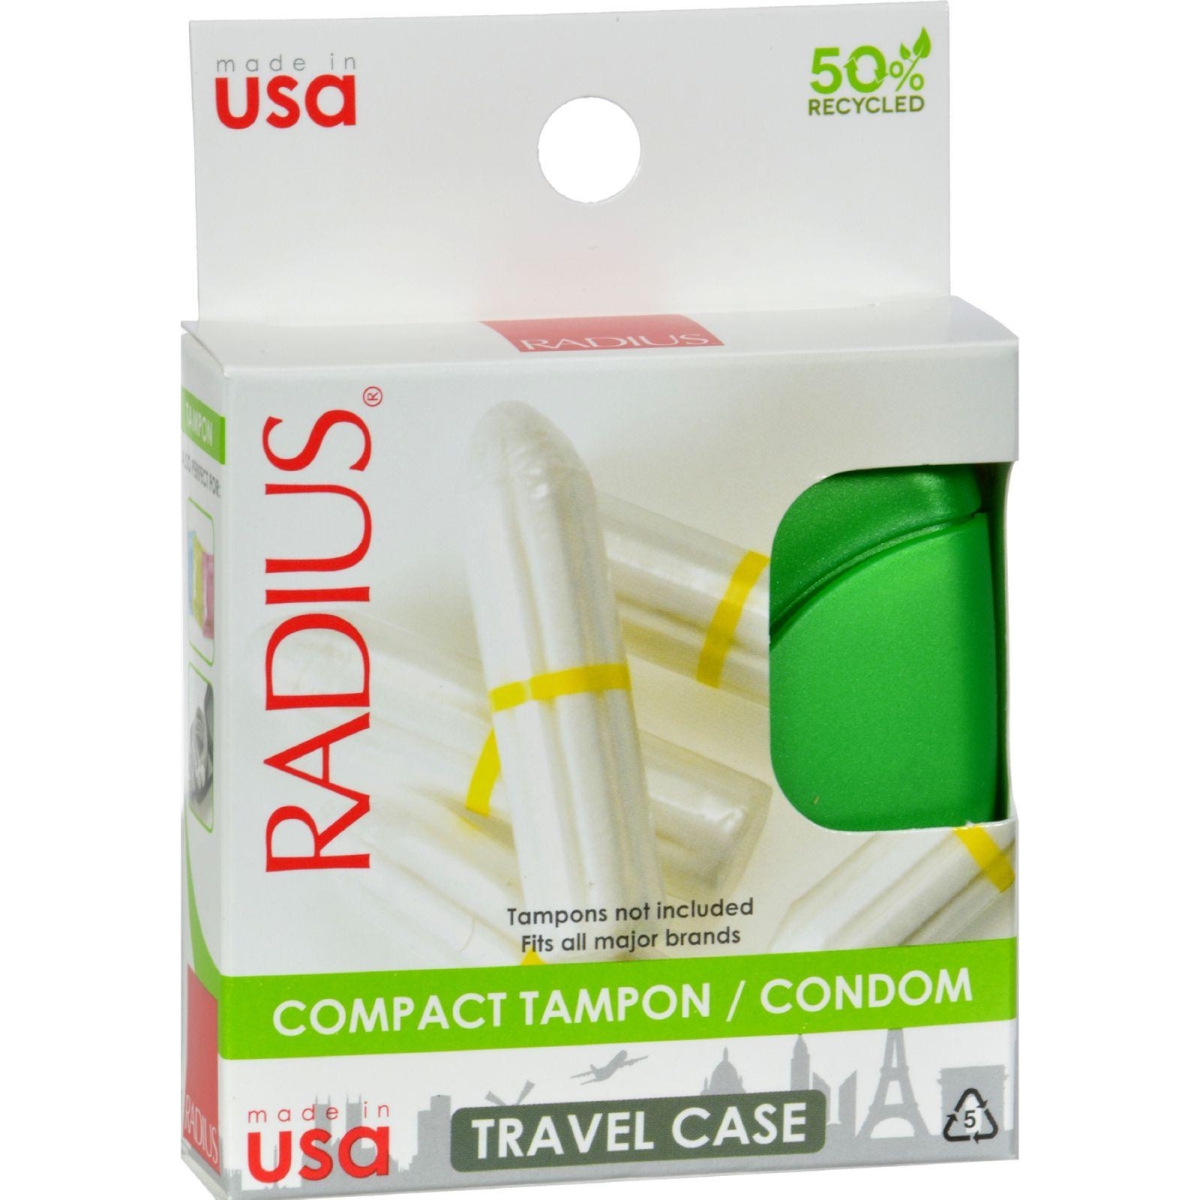 Hg0223297 Compact Tampon Case - Case Of 6